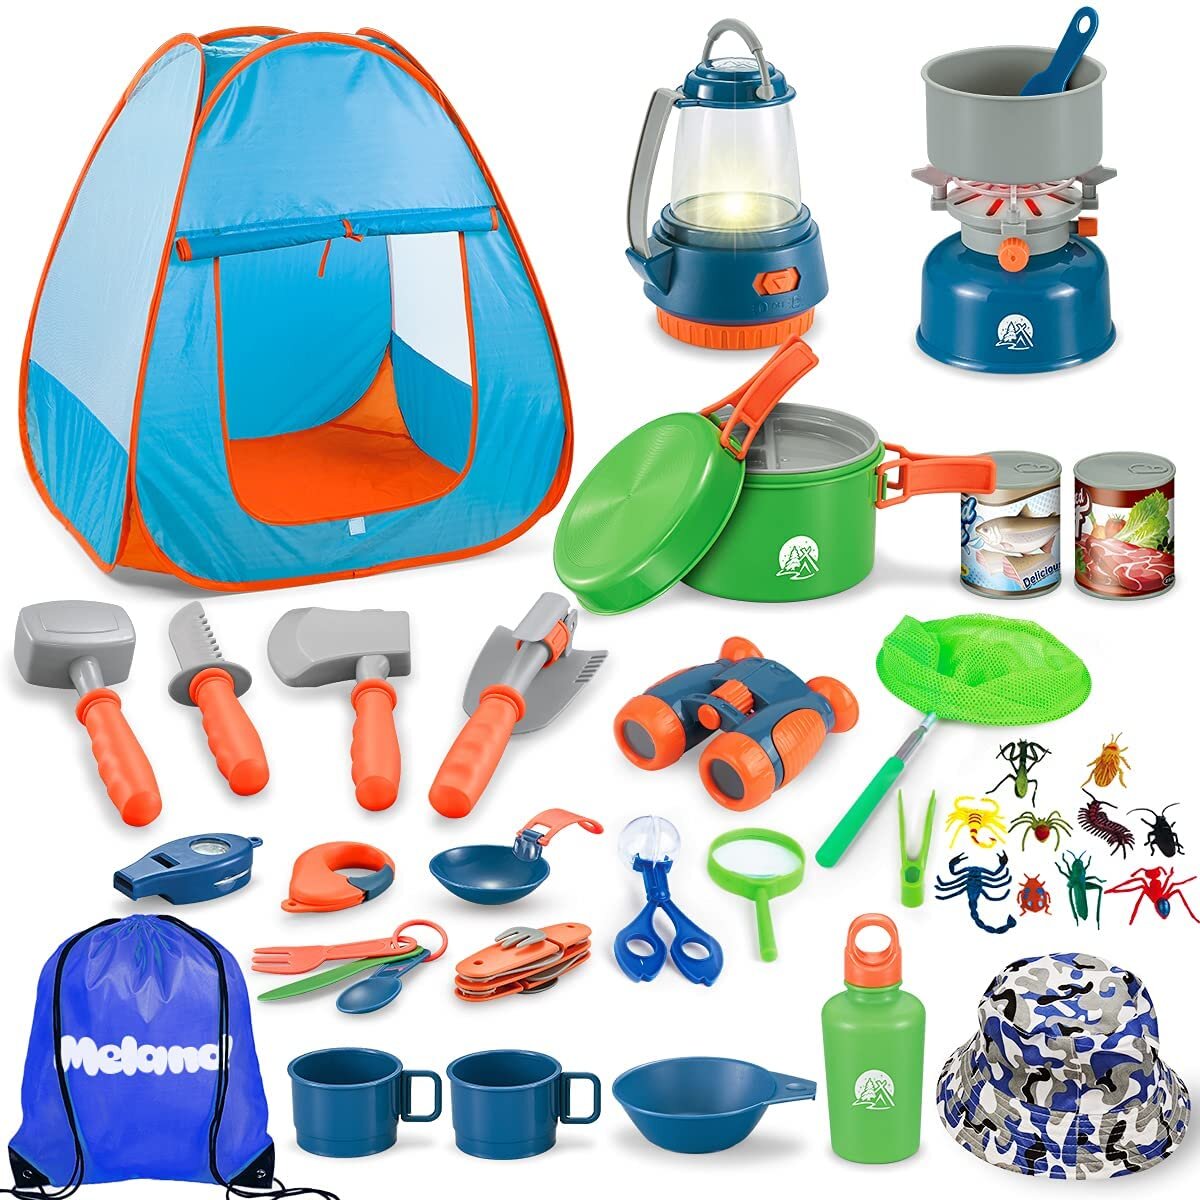 Little Explorer Camping Tent & Tools Toy Gear Play Set for Kids With Lantern New 